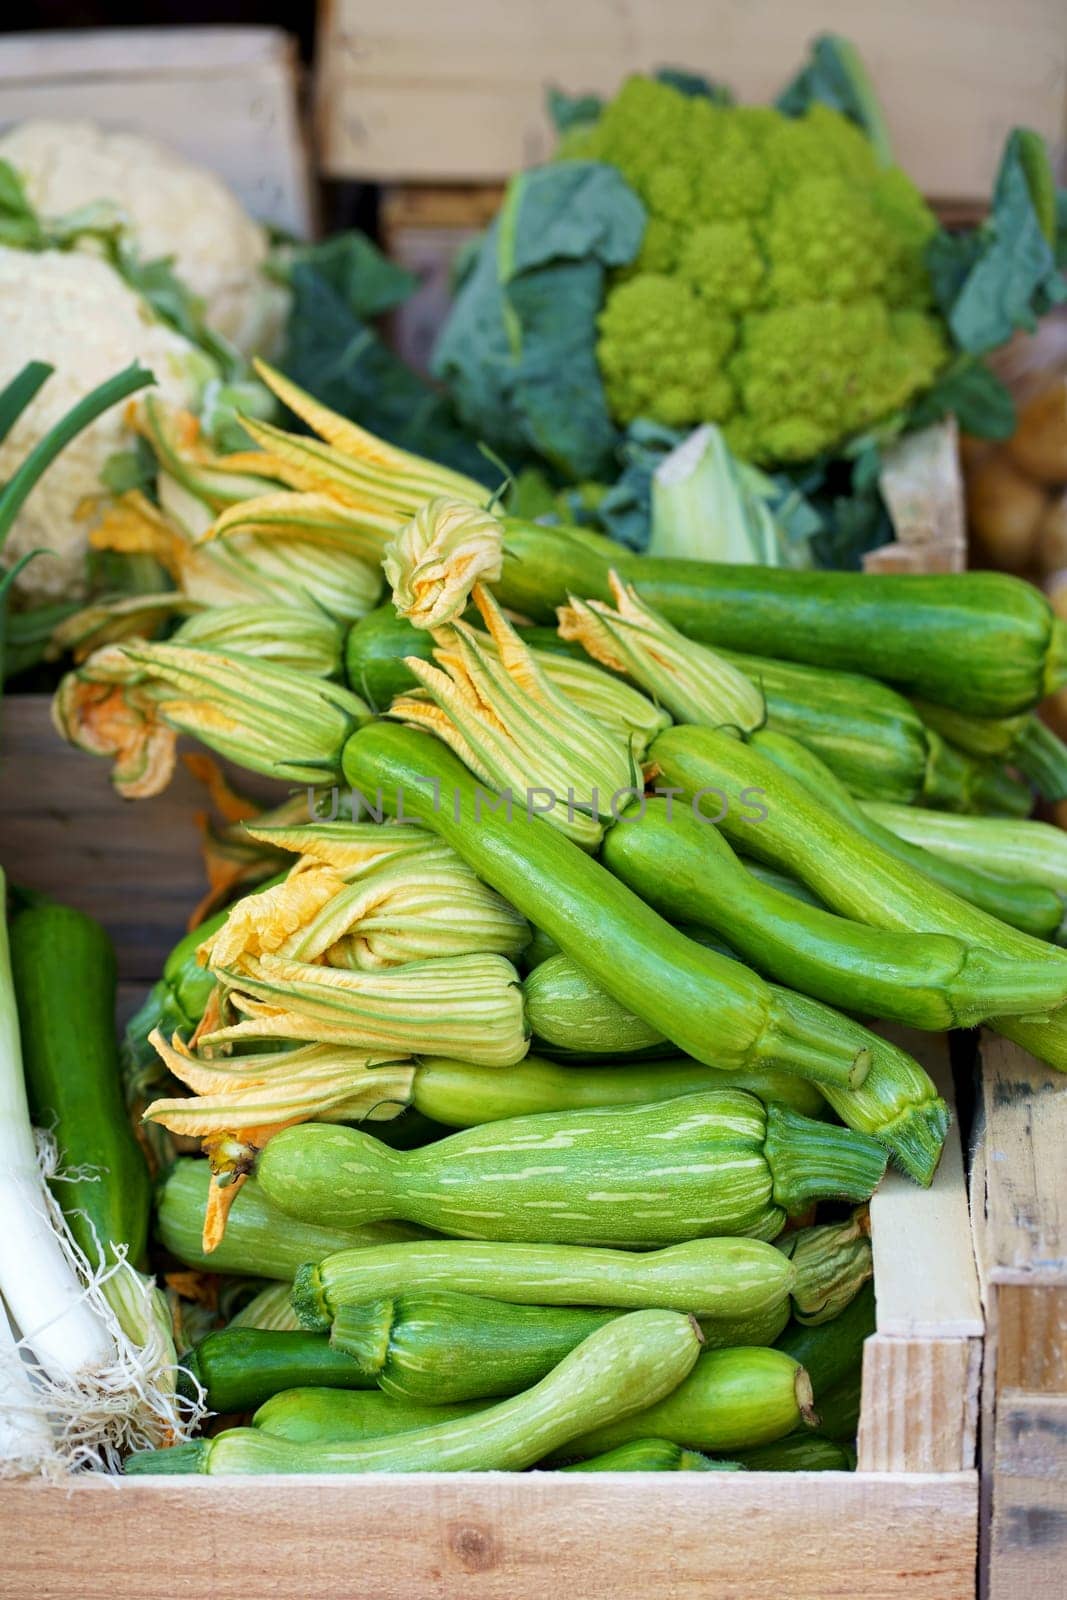 Nice. French market. Fresh zucchini with flowers sold at the market. Zucchini flowers are used in traditional French cuisine by aprilphoto